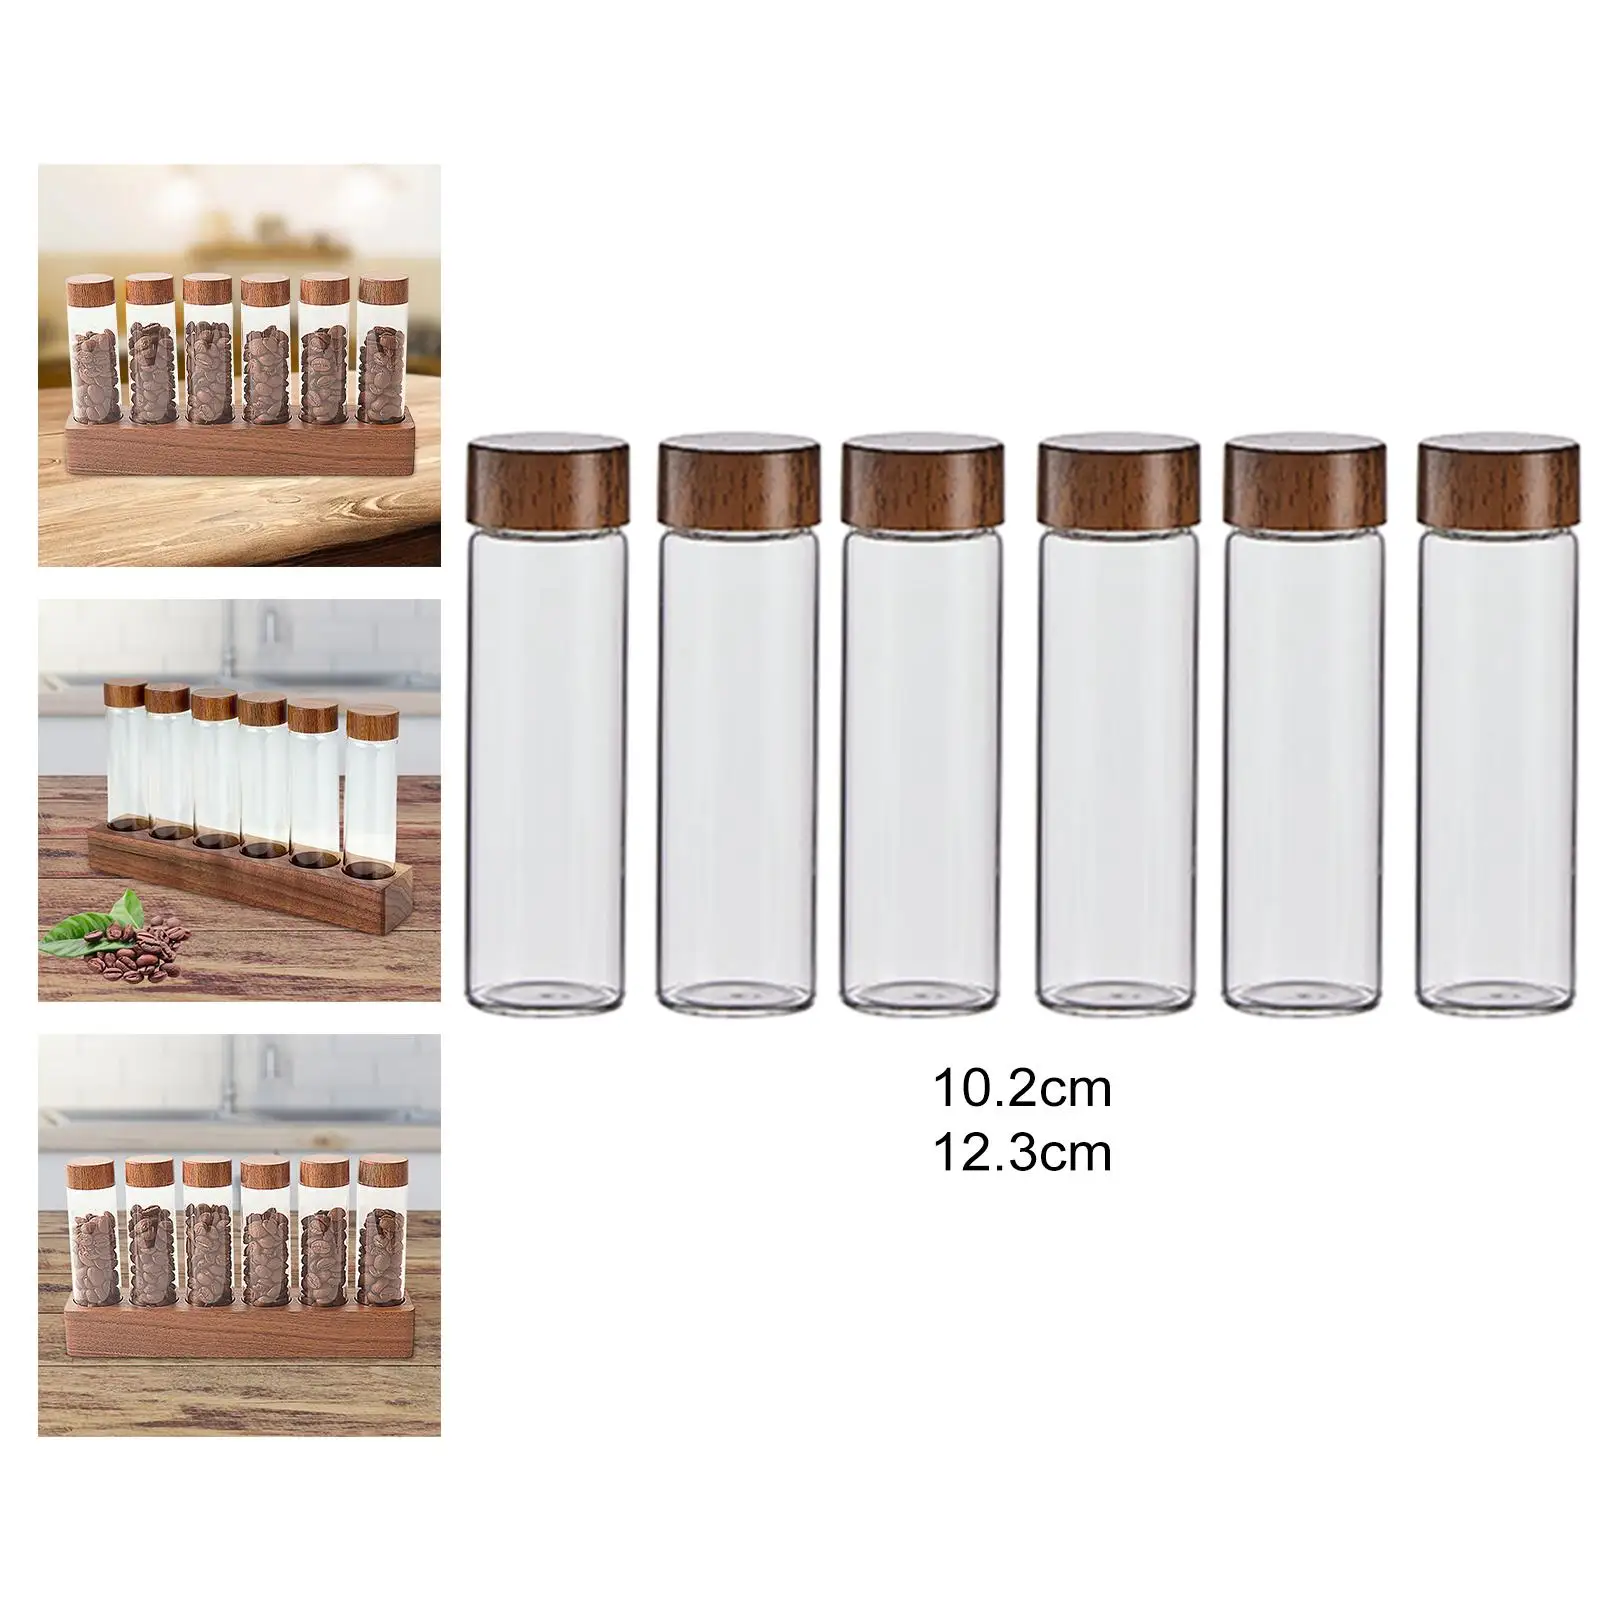 6 Pieces Coffee Bean Jar Glass Coffee Beans Storage Containers for Cafe Bar